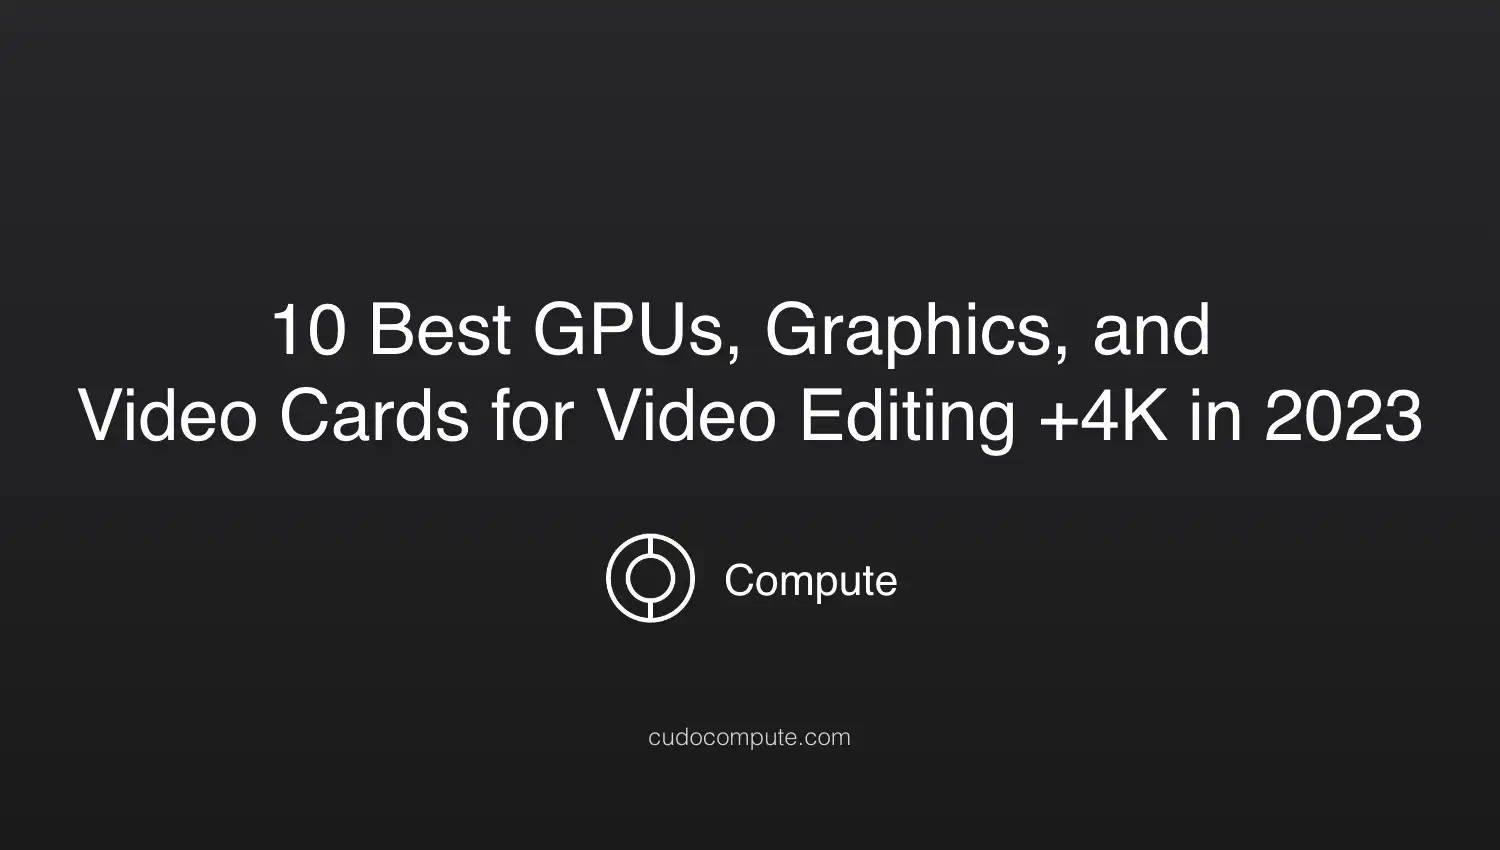 10 Best GPUs, Graphics, and Video Cards for Video Editing +4K in 2023 cover photo